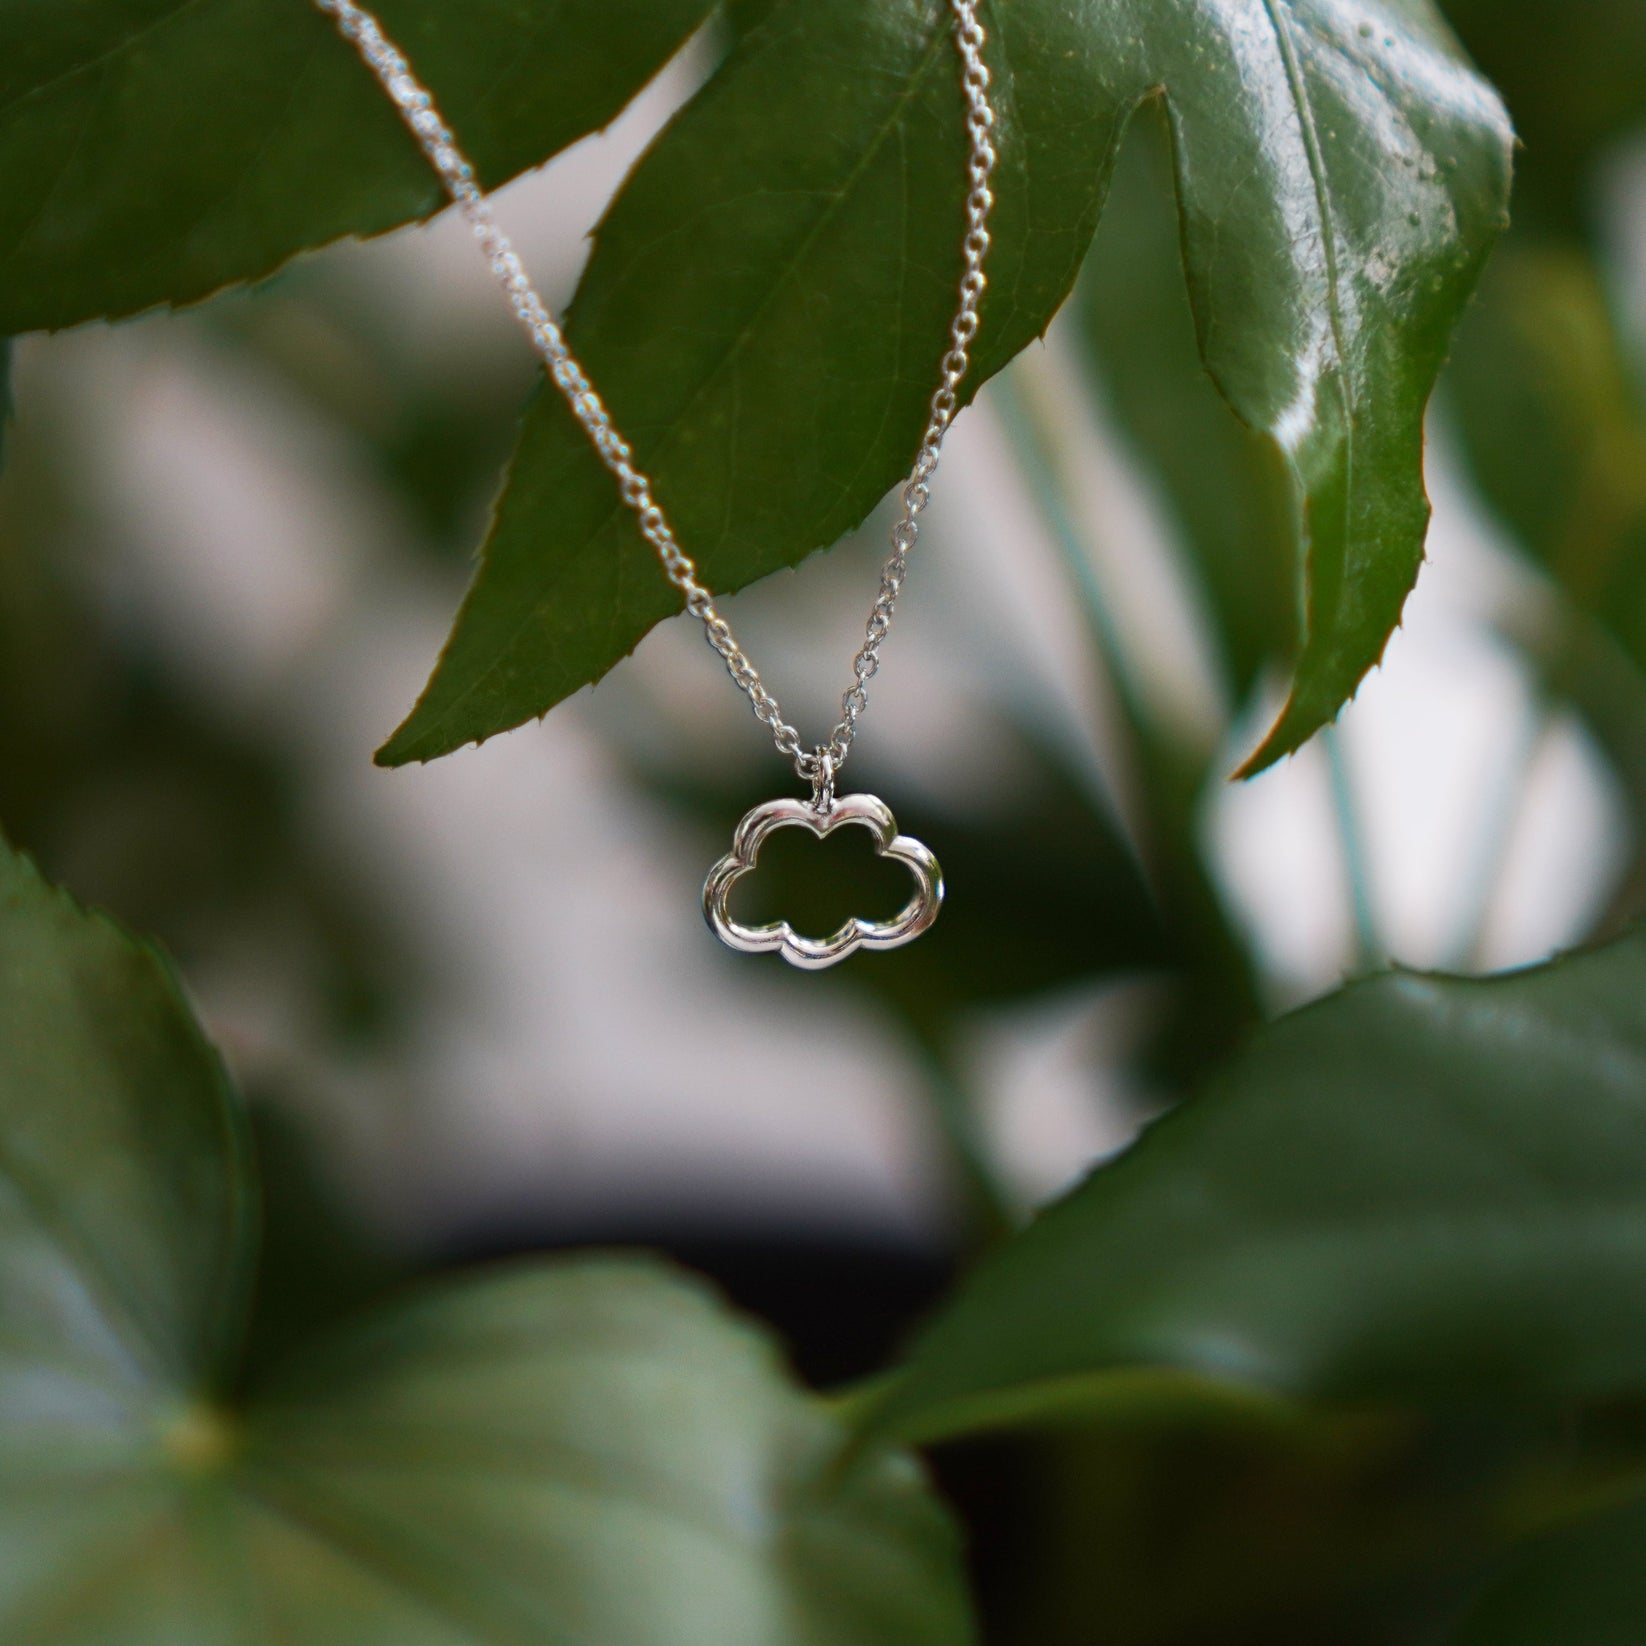 Silver Lining Cloud Necklace - Silver & Aisling Chou Studio